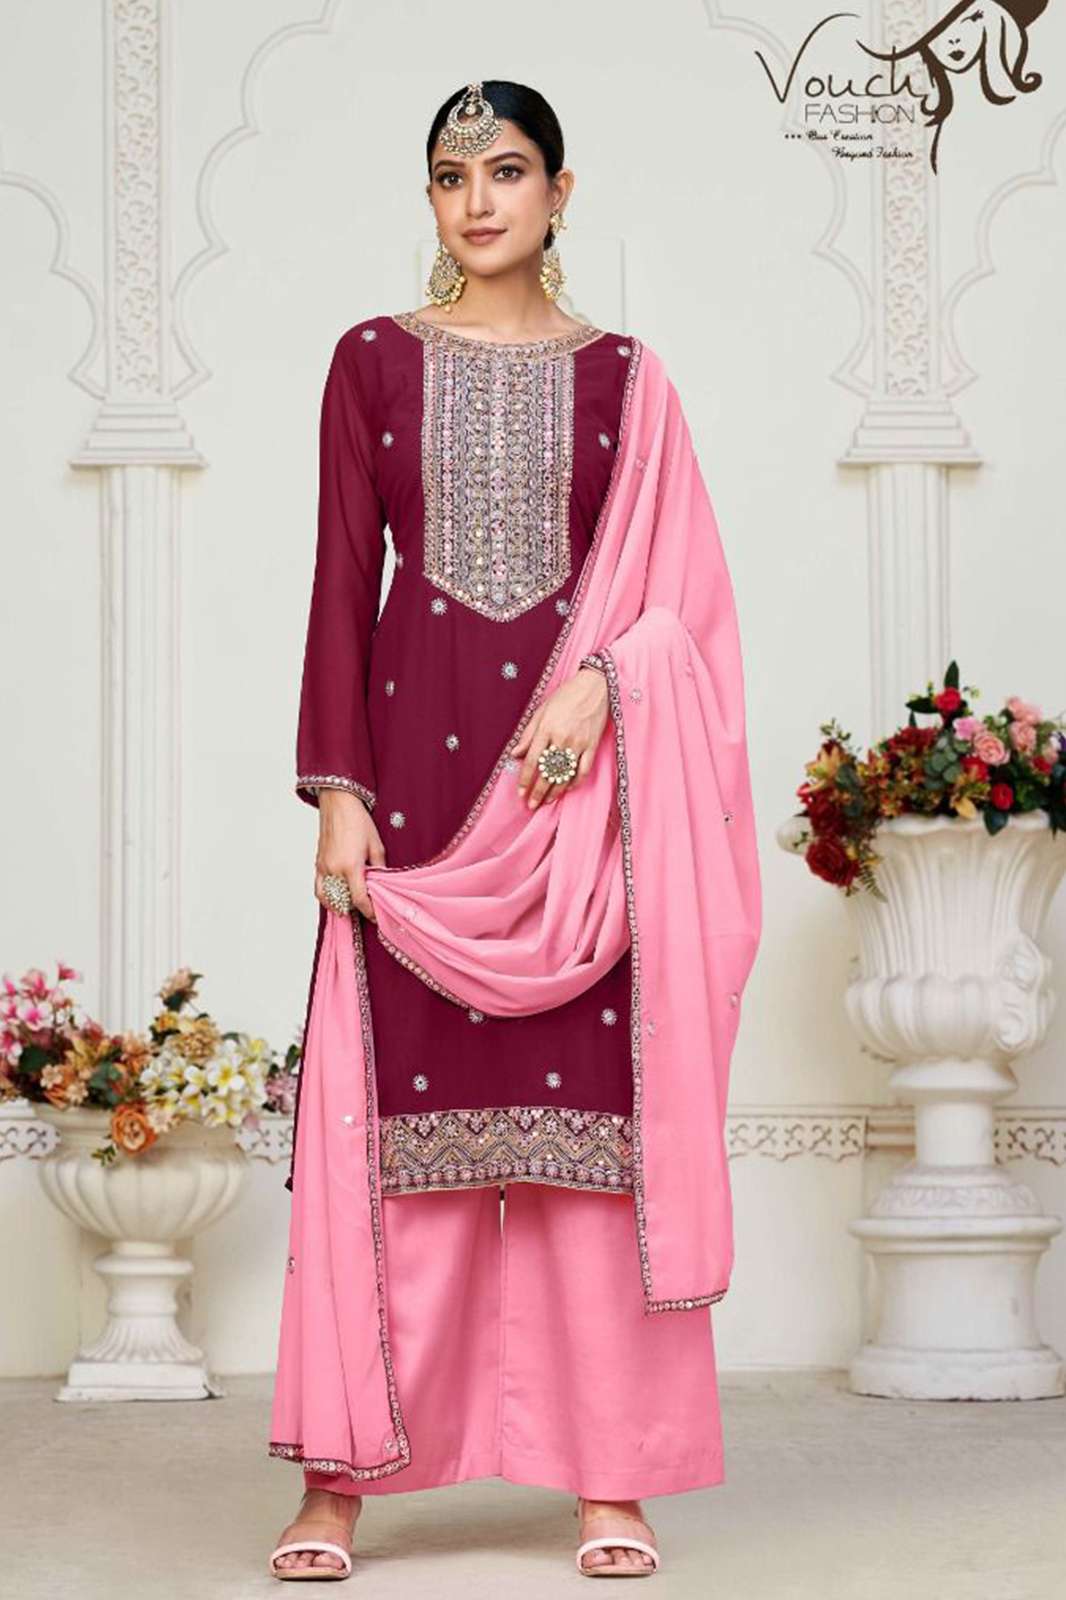 VOUCH  Noor mahal vol-2 HEAVY GEORGETTE WITH EMBROIDERY WORK & FULL HAND WORK MIRROR TOUCH SUIT